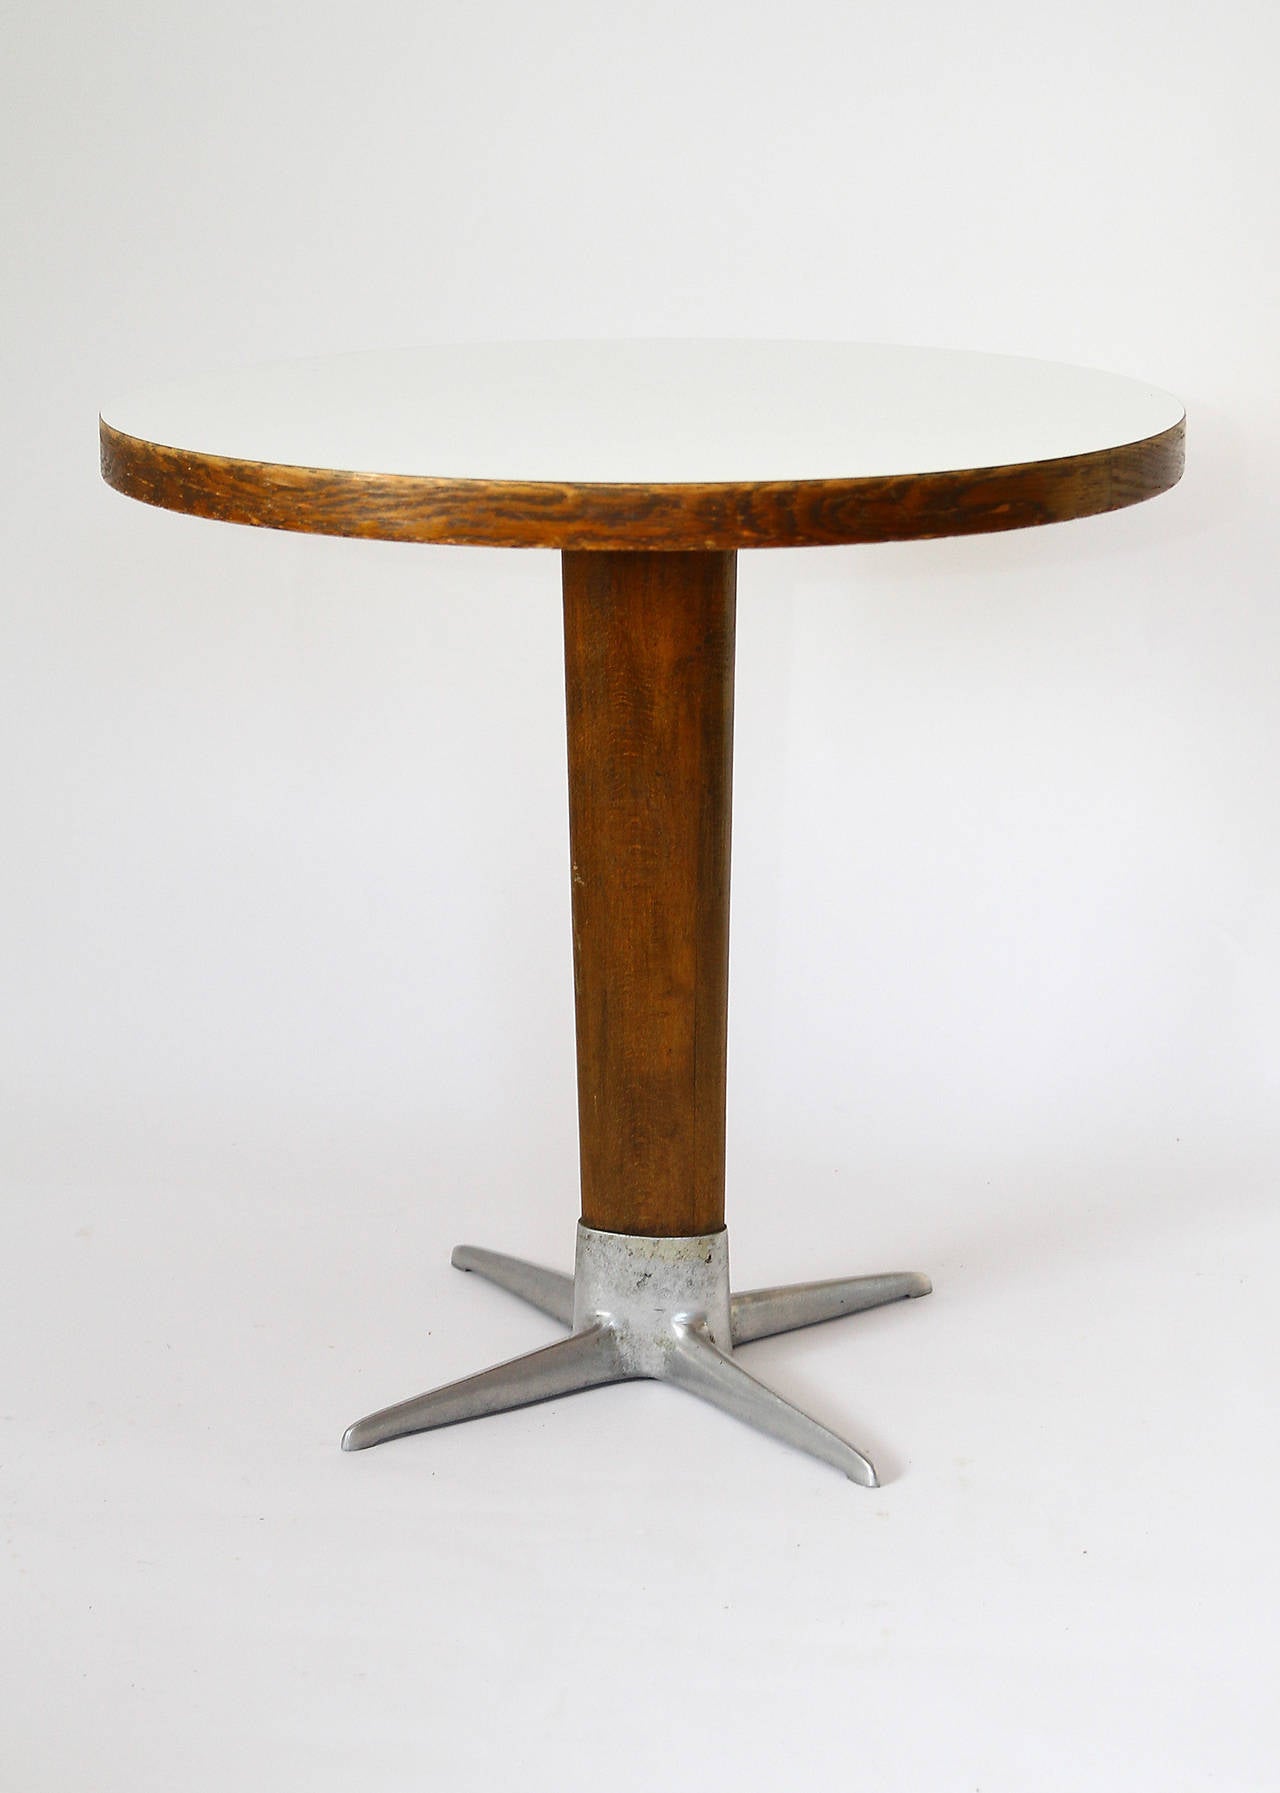 A Viennese coffee table, designed by the Austrian architect Prof. Oswald Haerdtl and produced by Thonet, Austria, 1950's. This is a rare version with a round top and the Haerdtl-specific X-base. It is made of nutwood and the top is laminated with